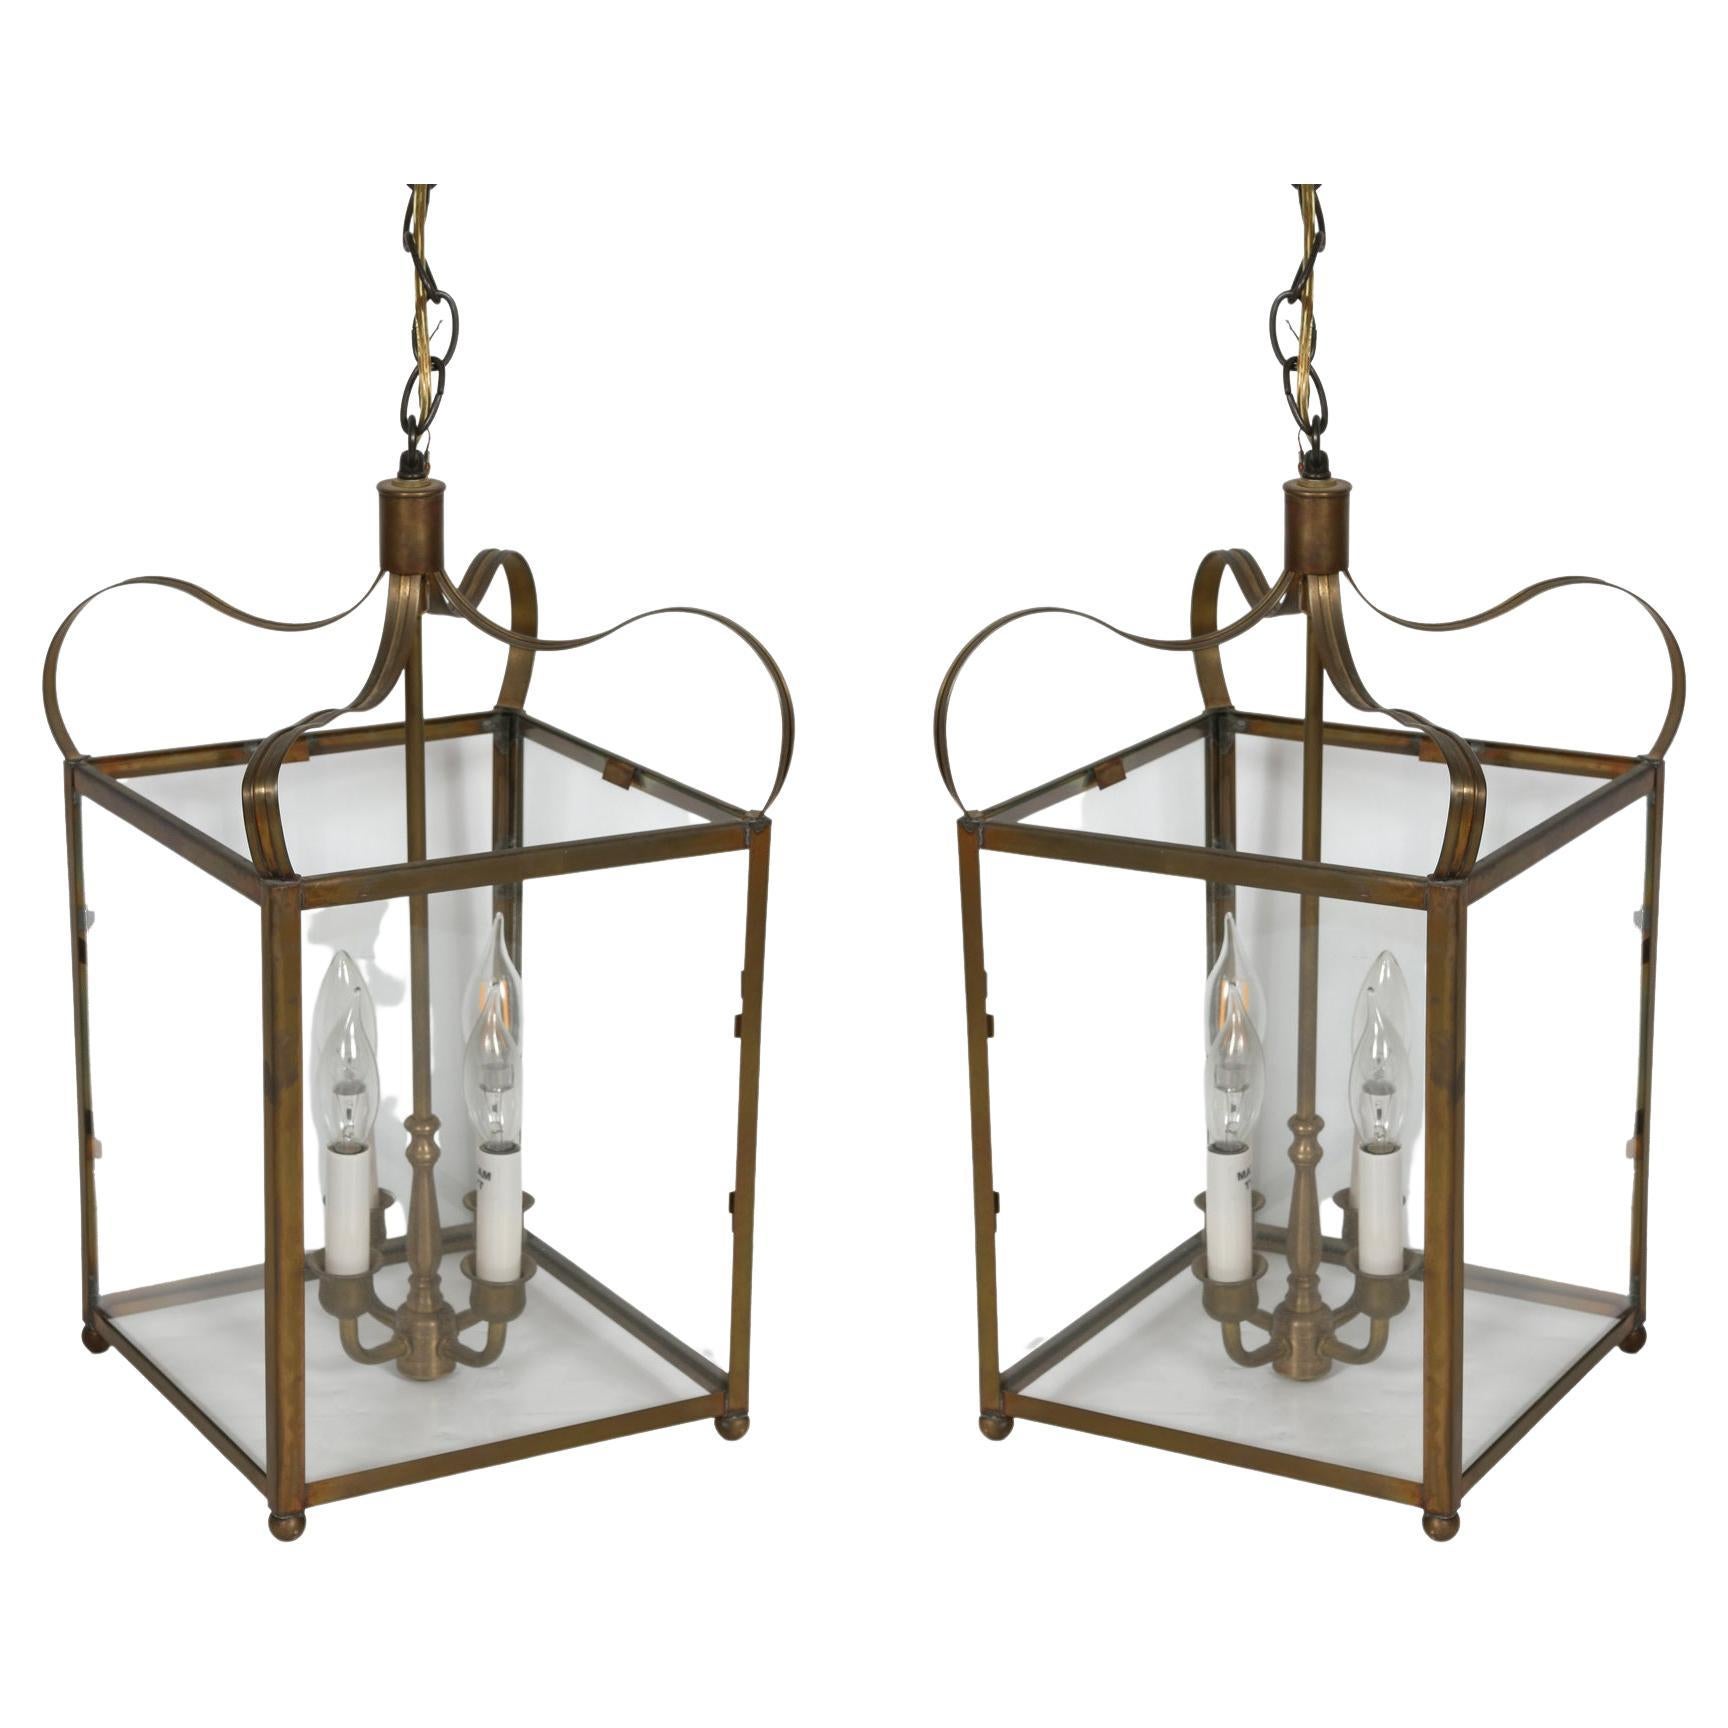 Pair of Vintage Brass Square Lanterns For Sale